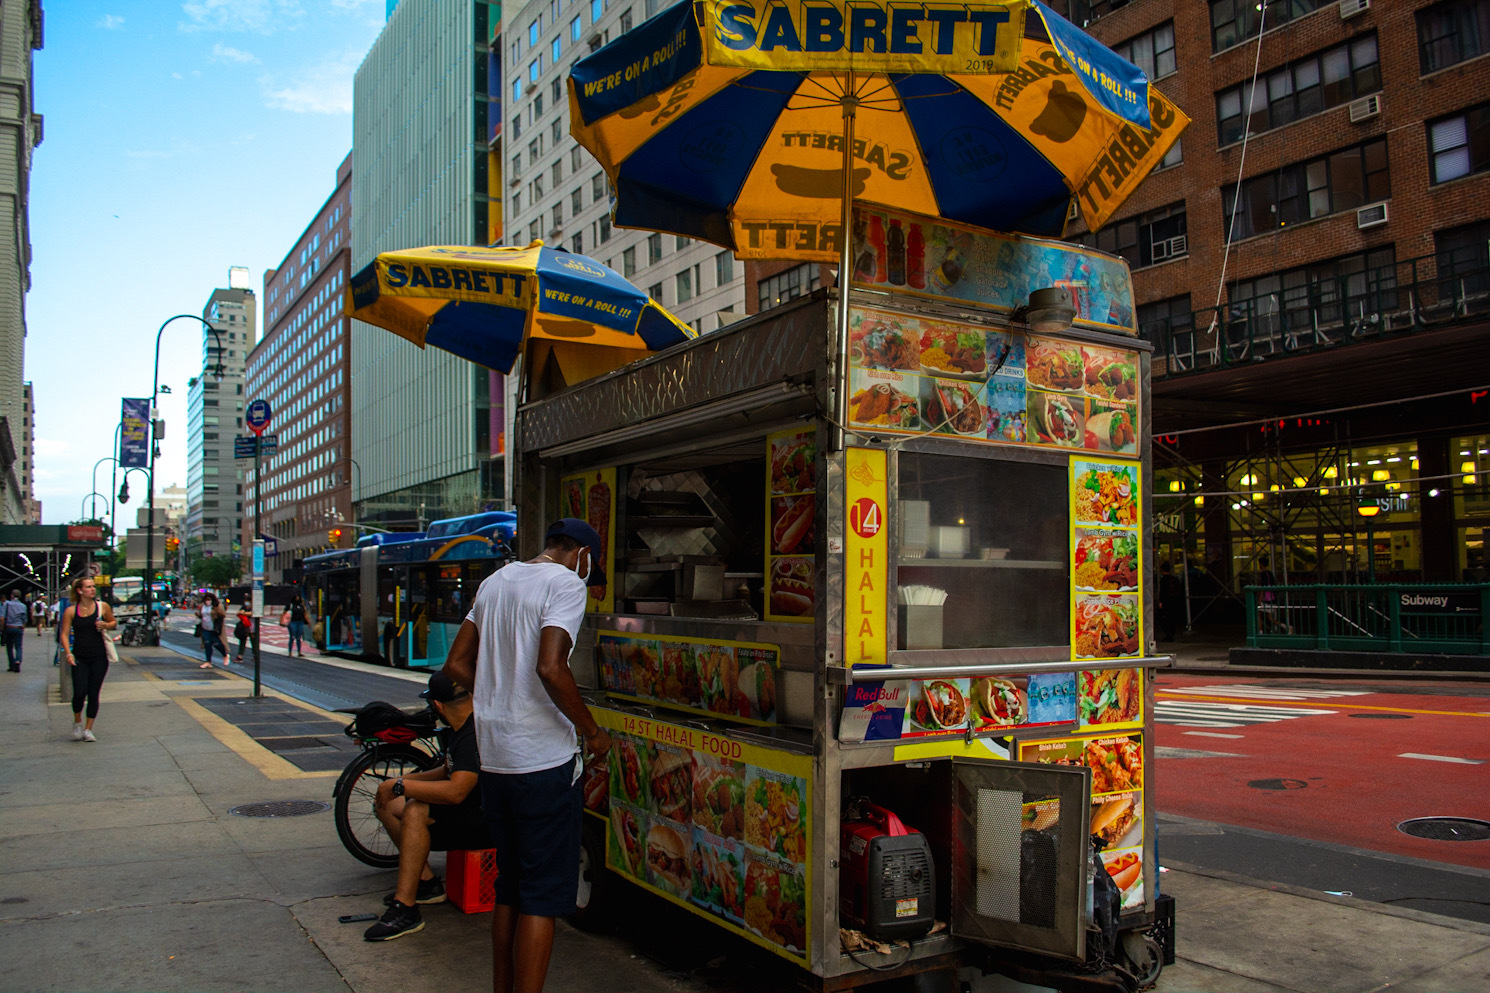 A halal food cart in the foreground, and East 14th Street in the background.